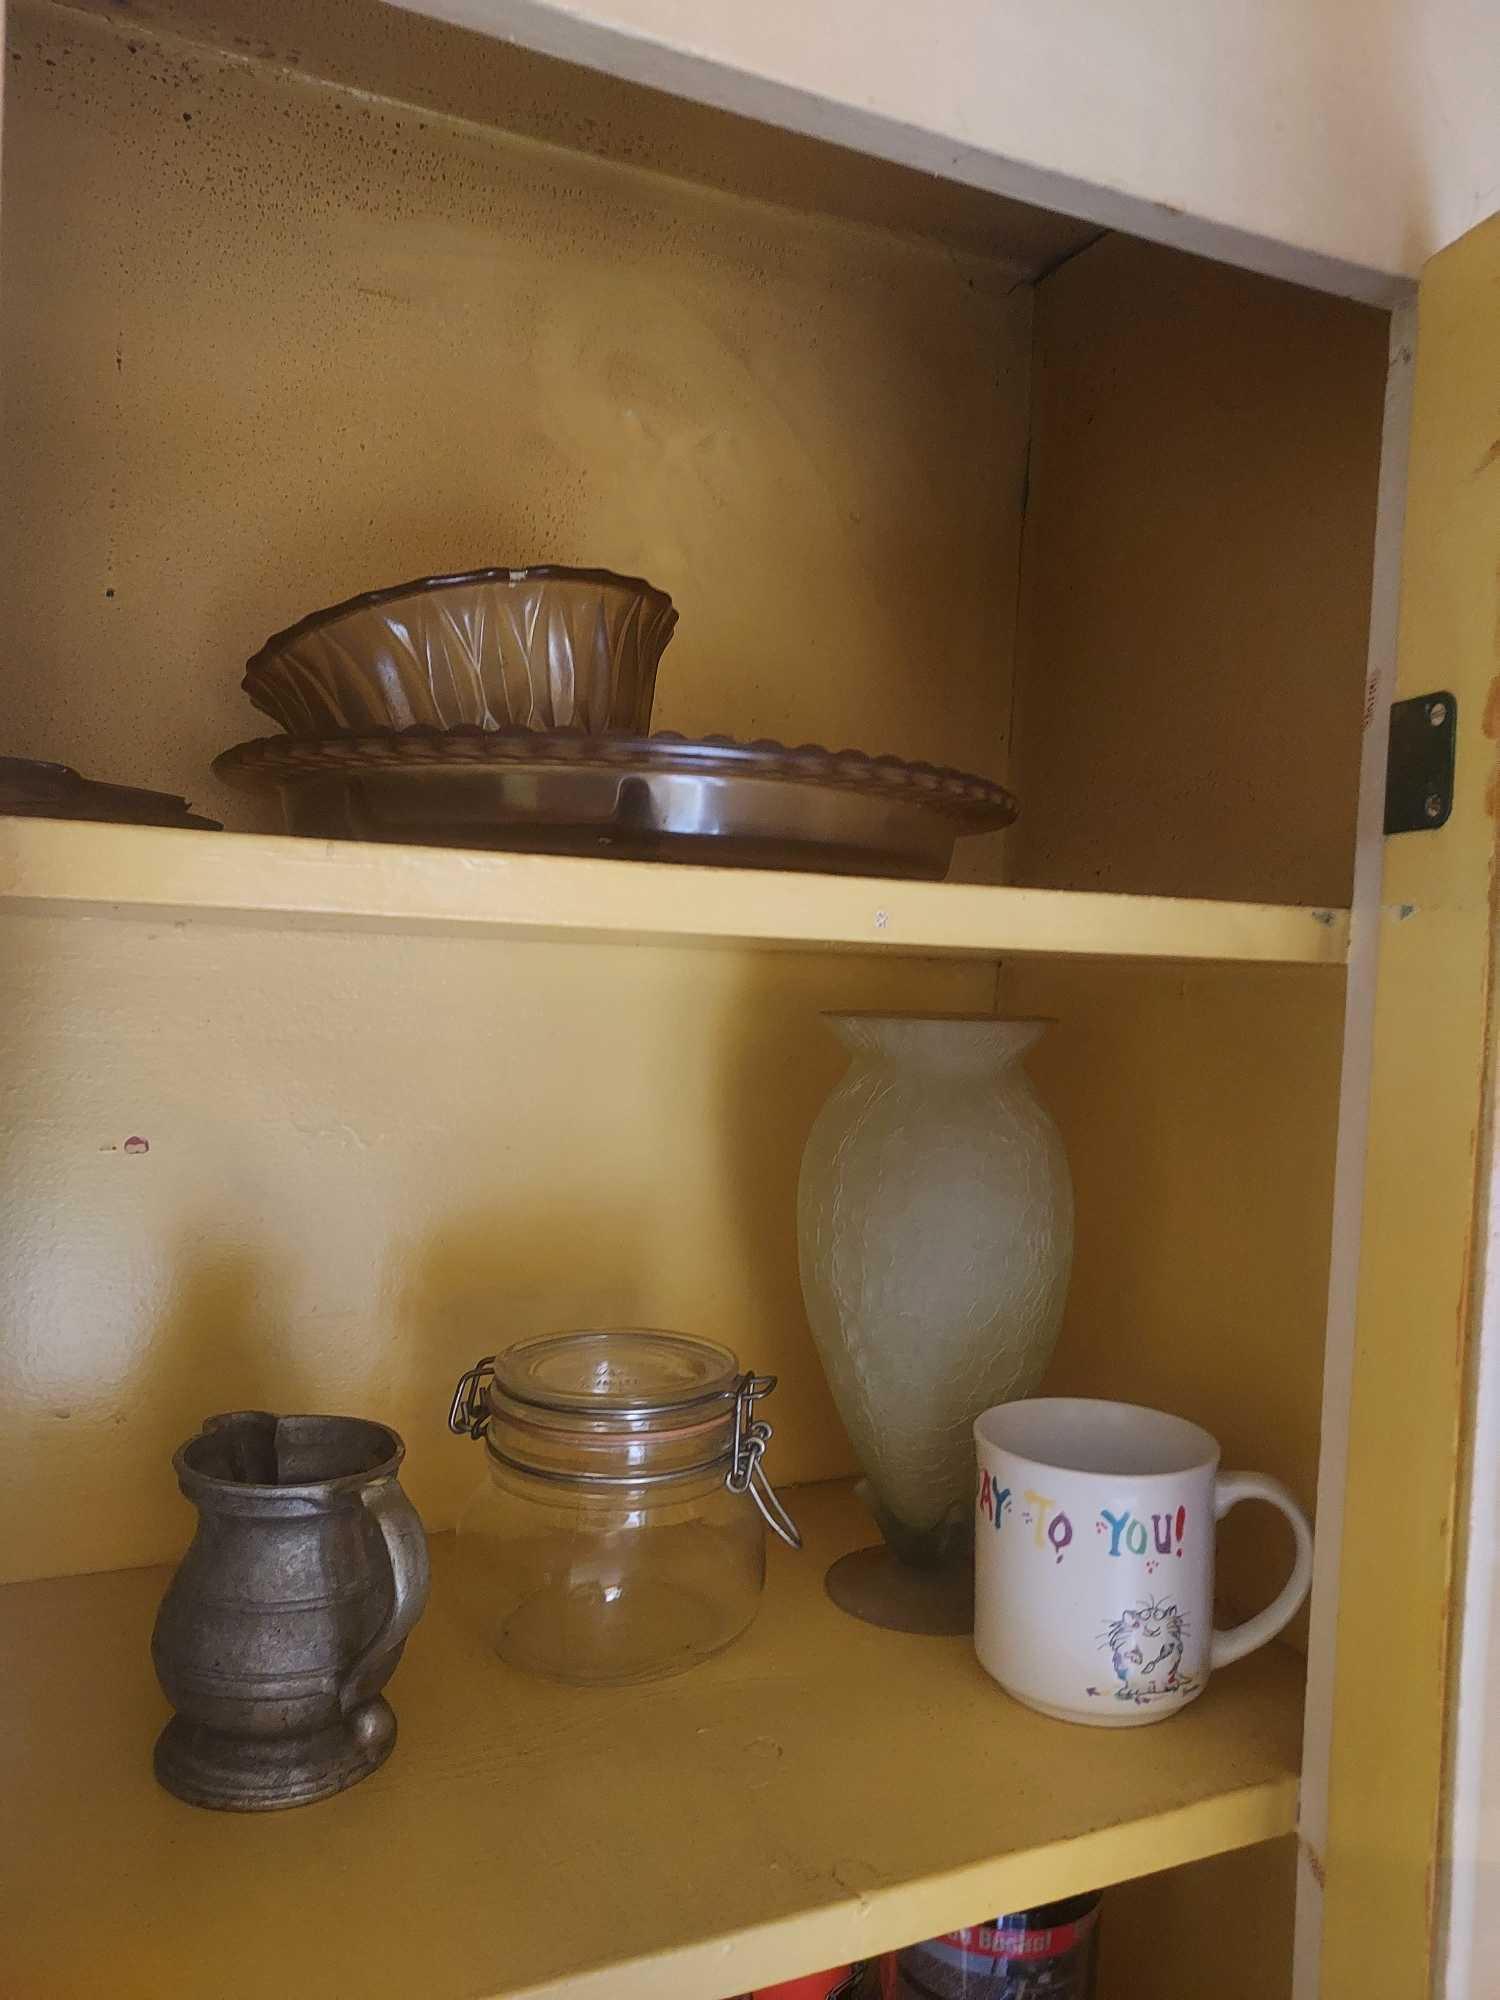 Contents of Kitchen Cabinets & Drawers